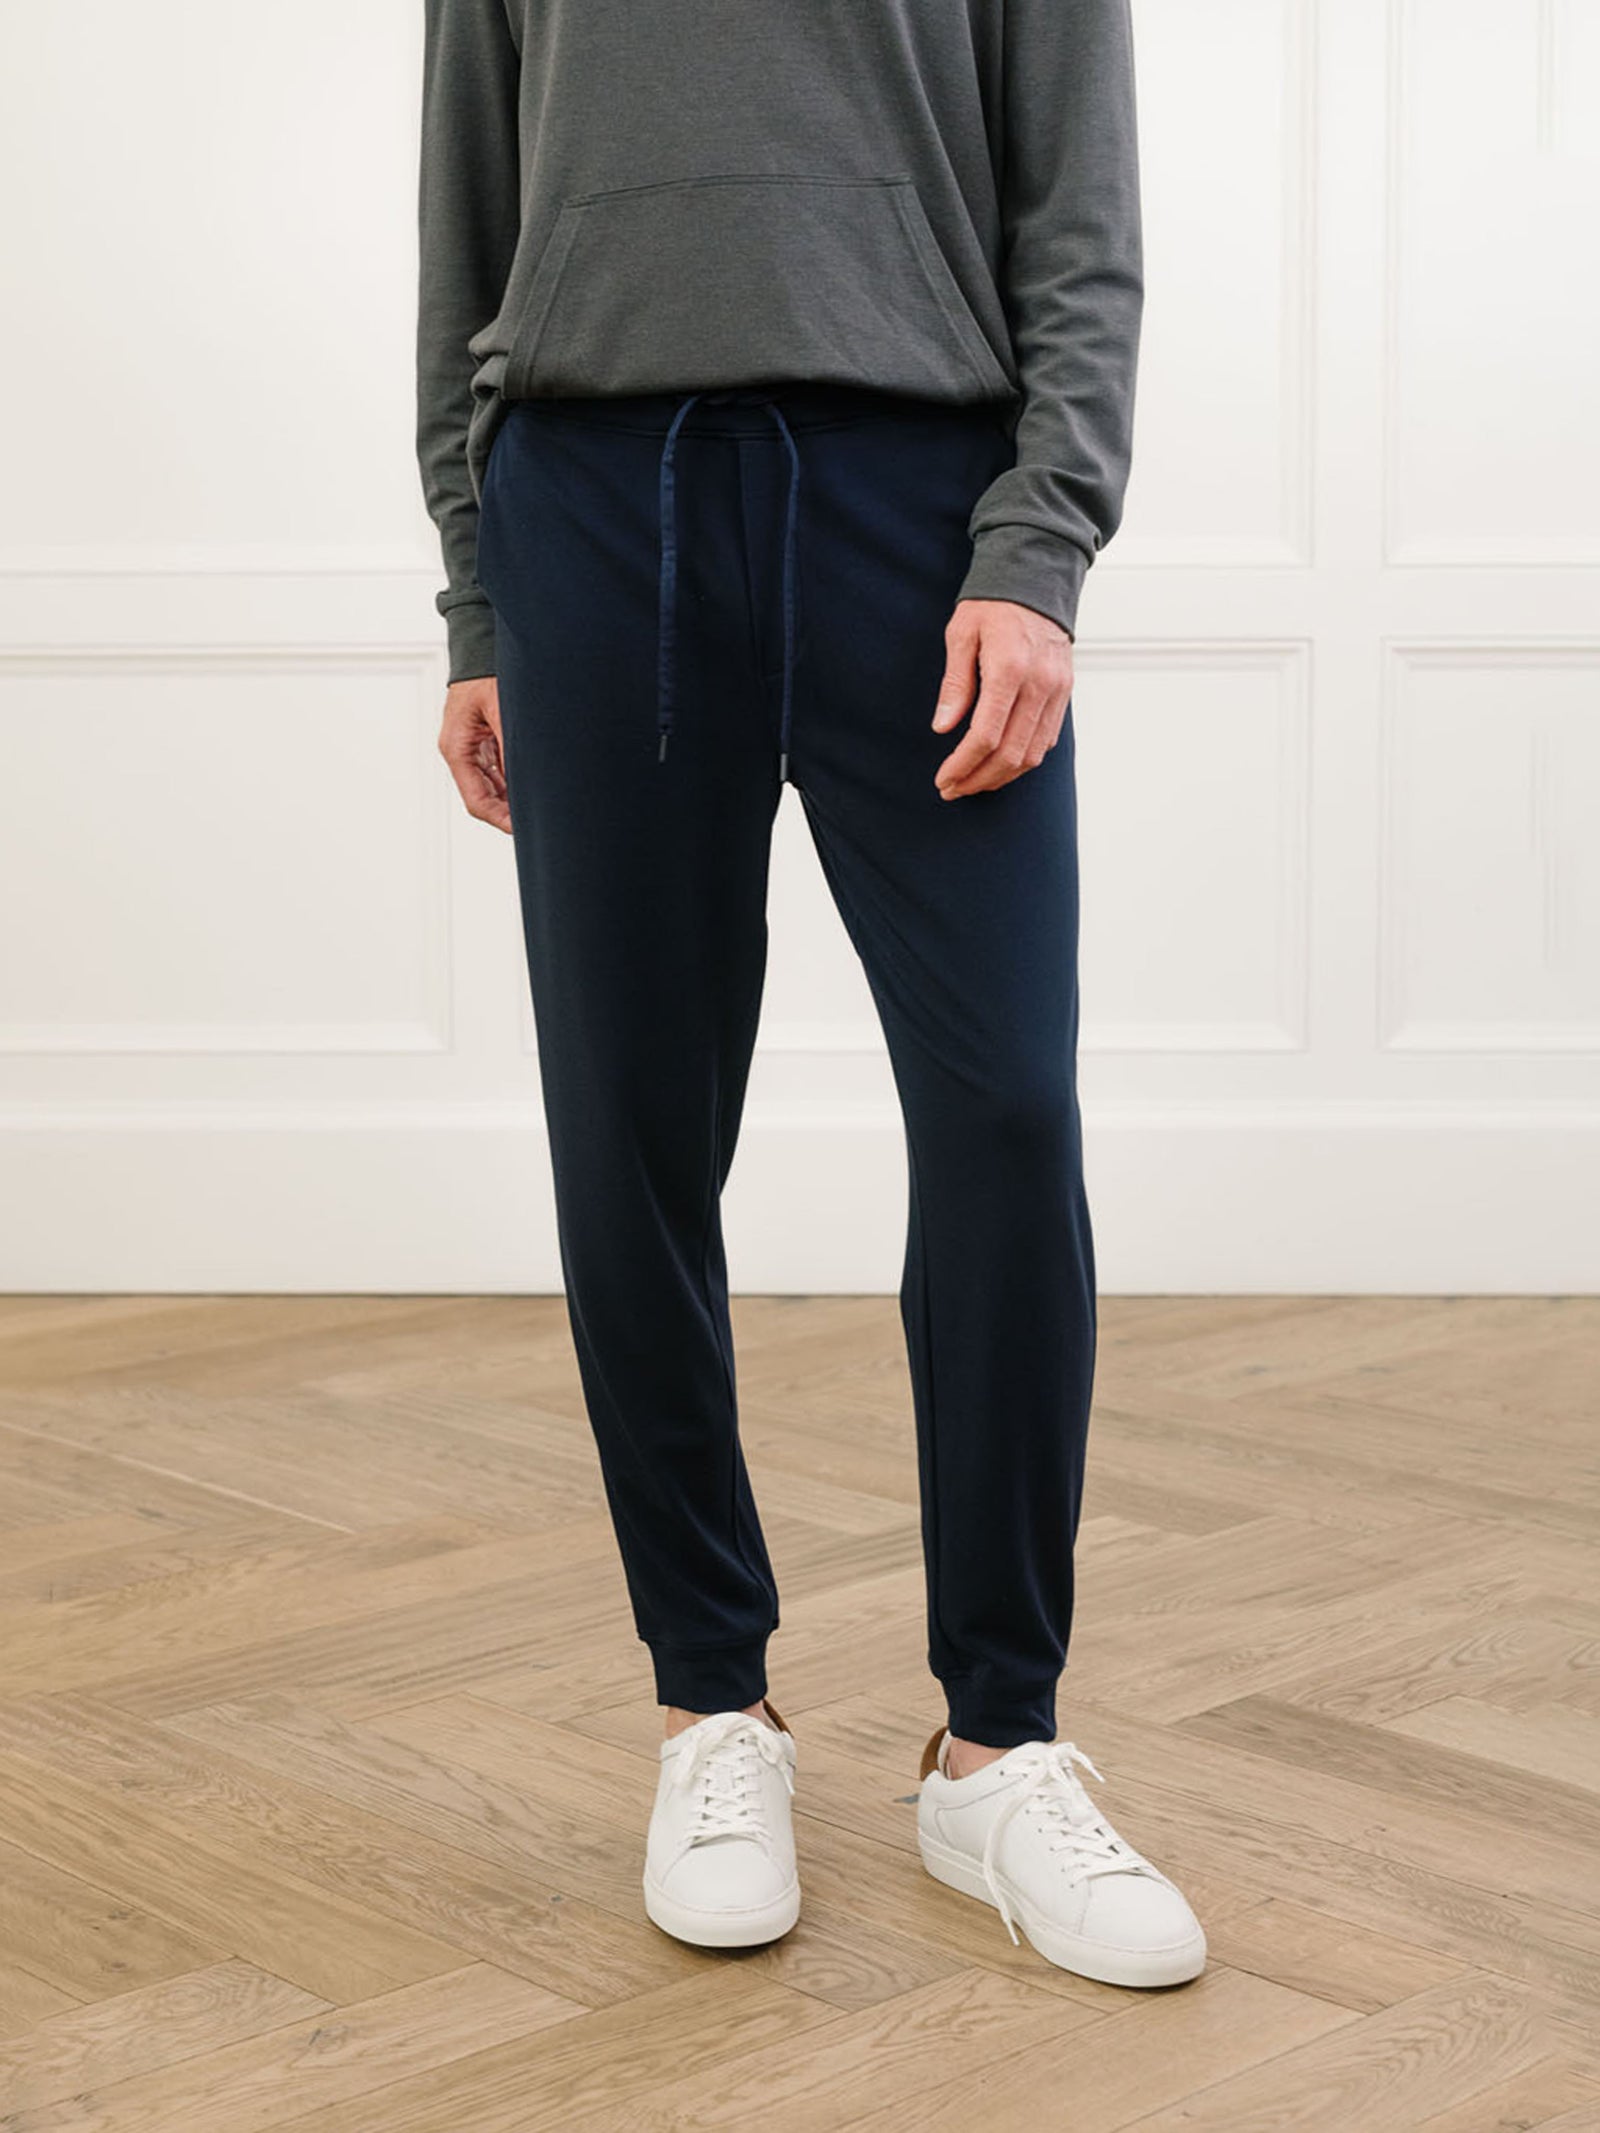 The Bamboo Emerson Joggers in Navy